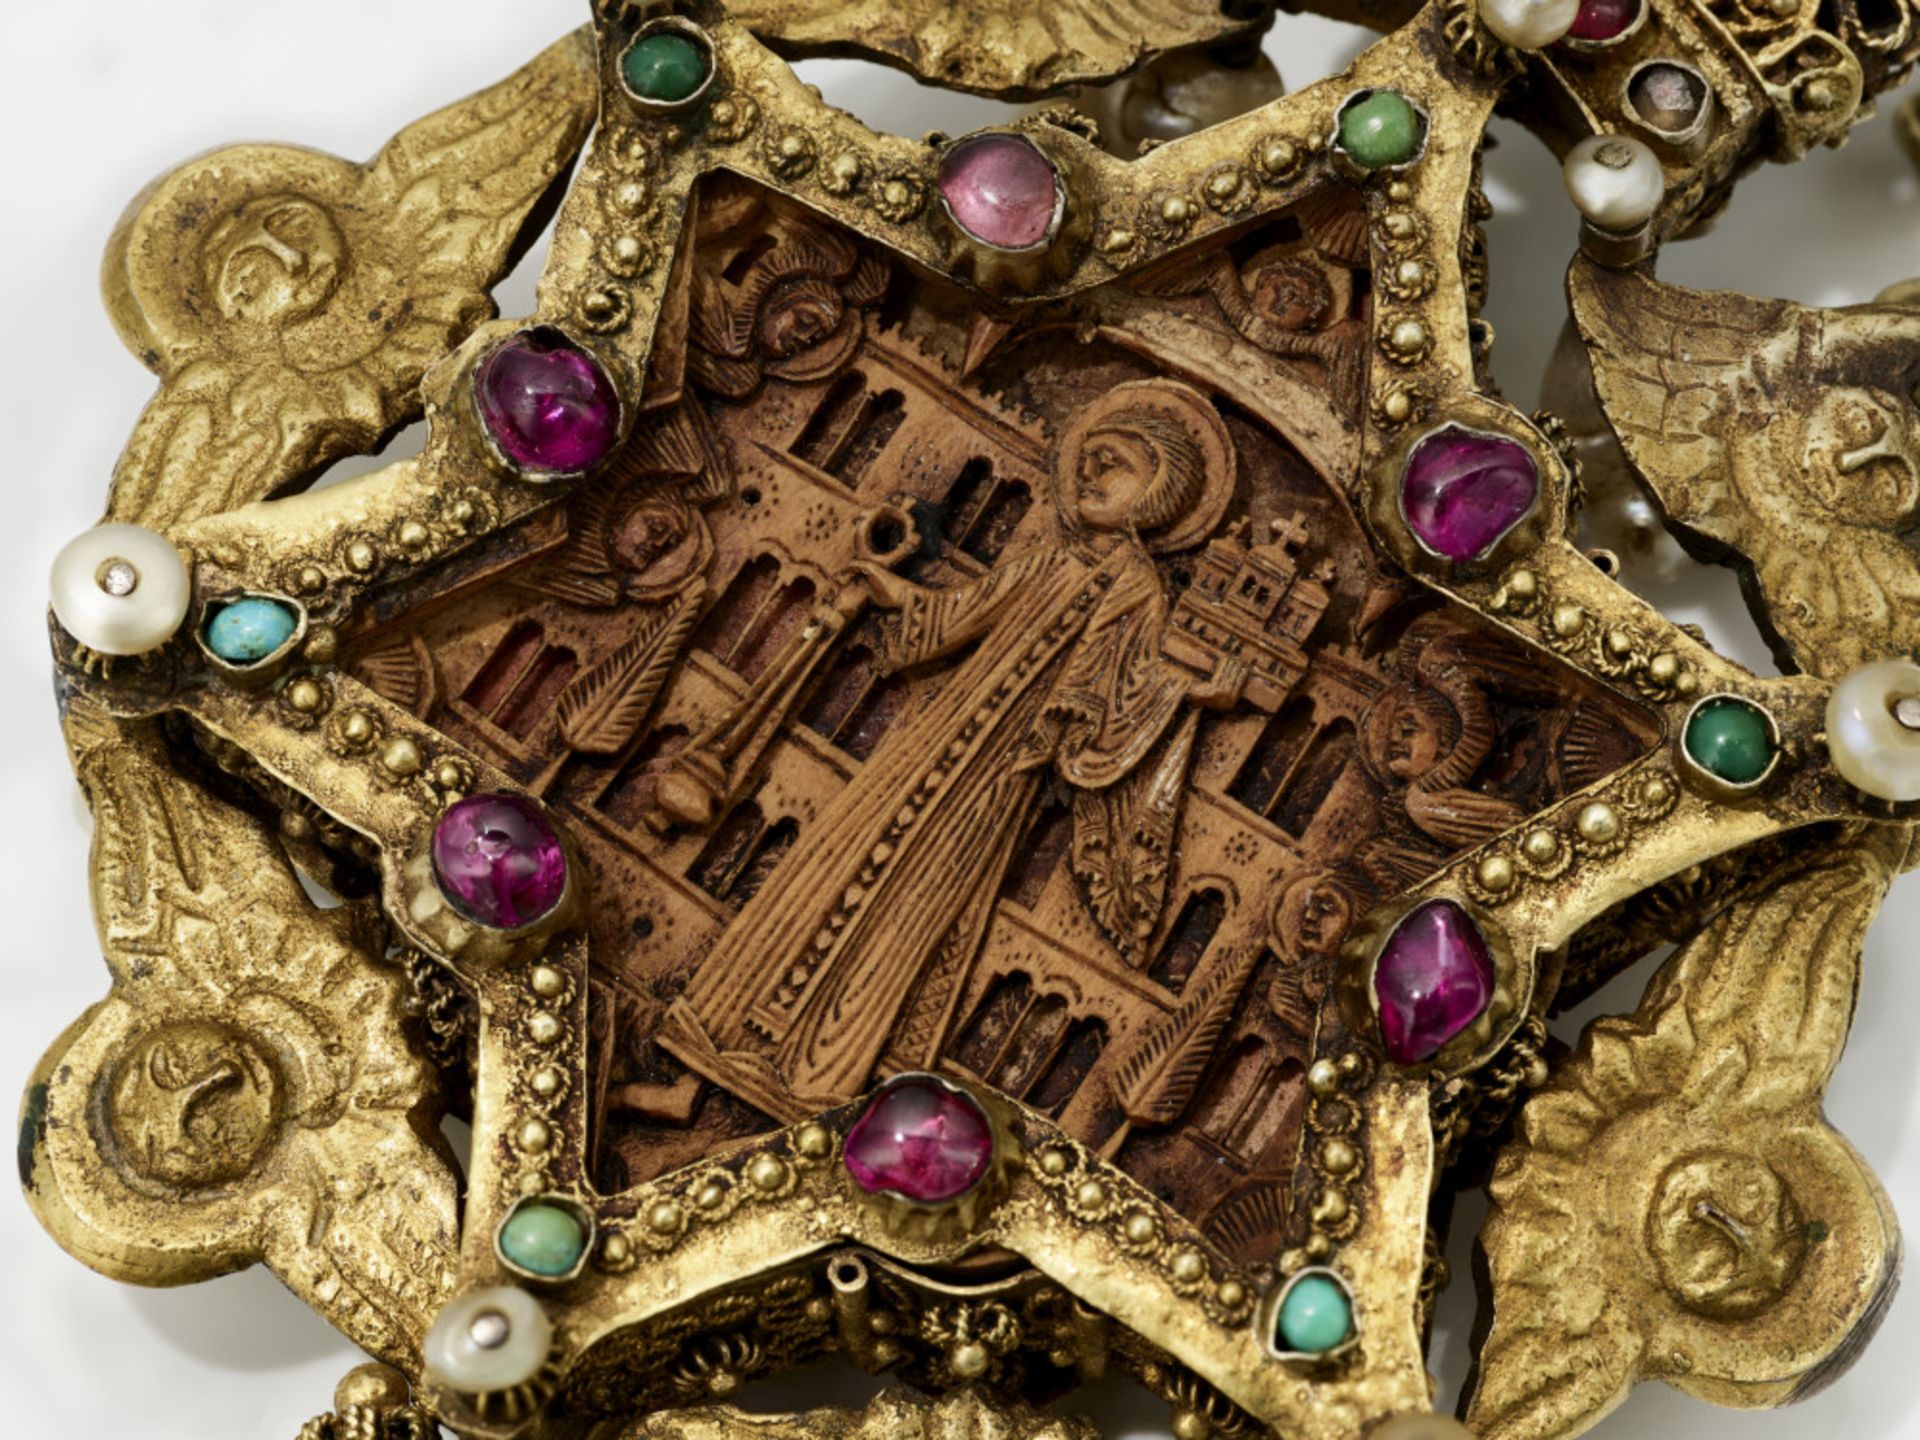 A pectoral pendant with necklace - Carving: probably Berg Athos, 18th century  - Image 7 of 7